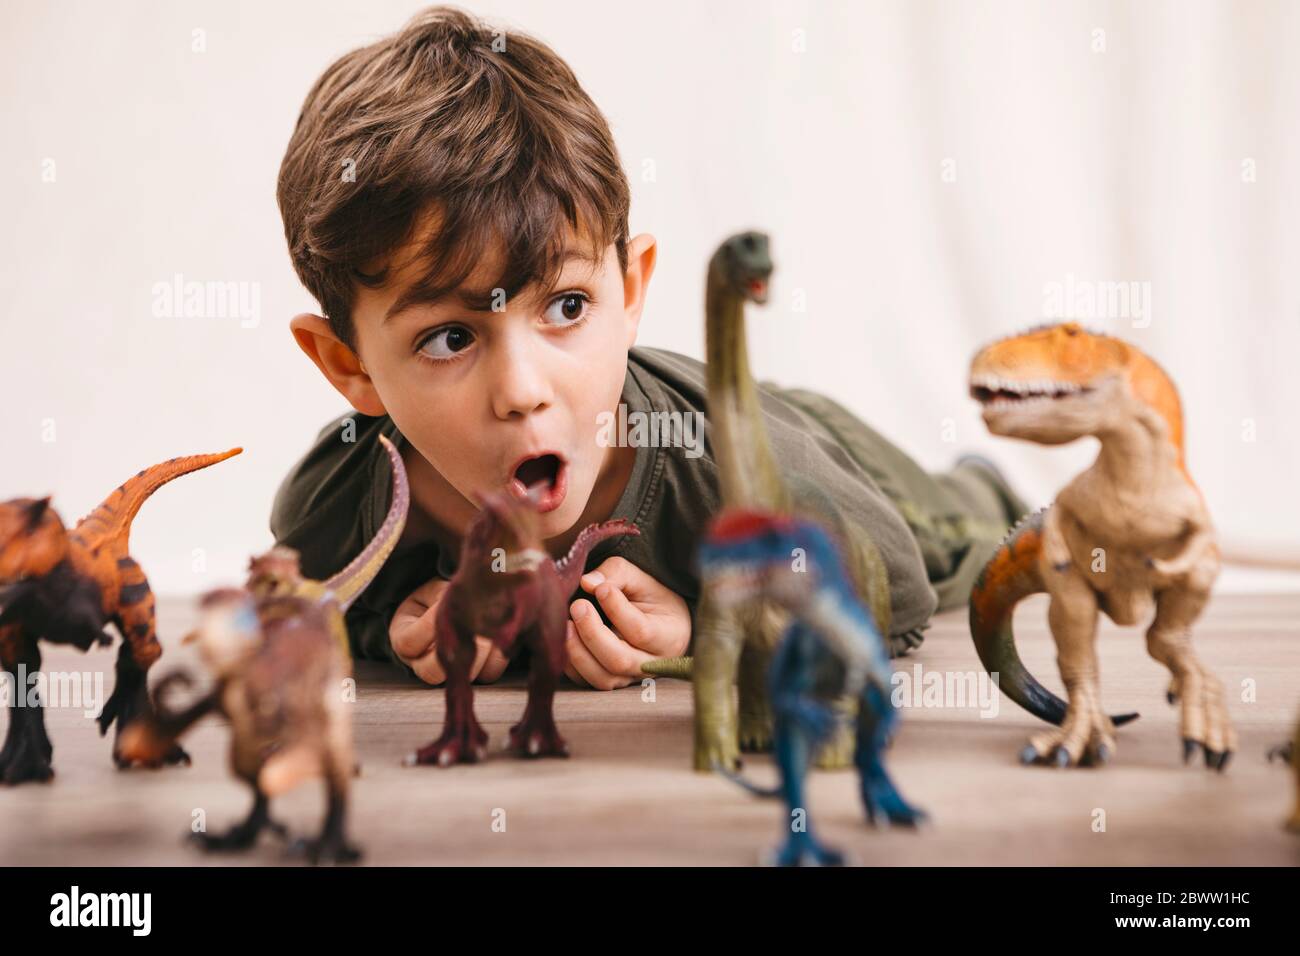 Portrait of little boy playing with toy dinosaurs Stock Photo